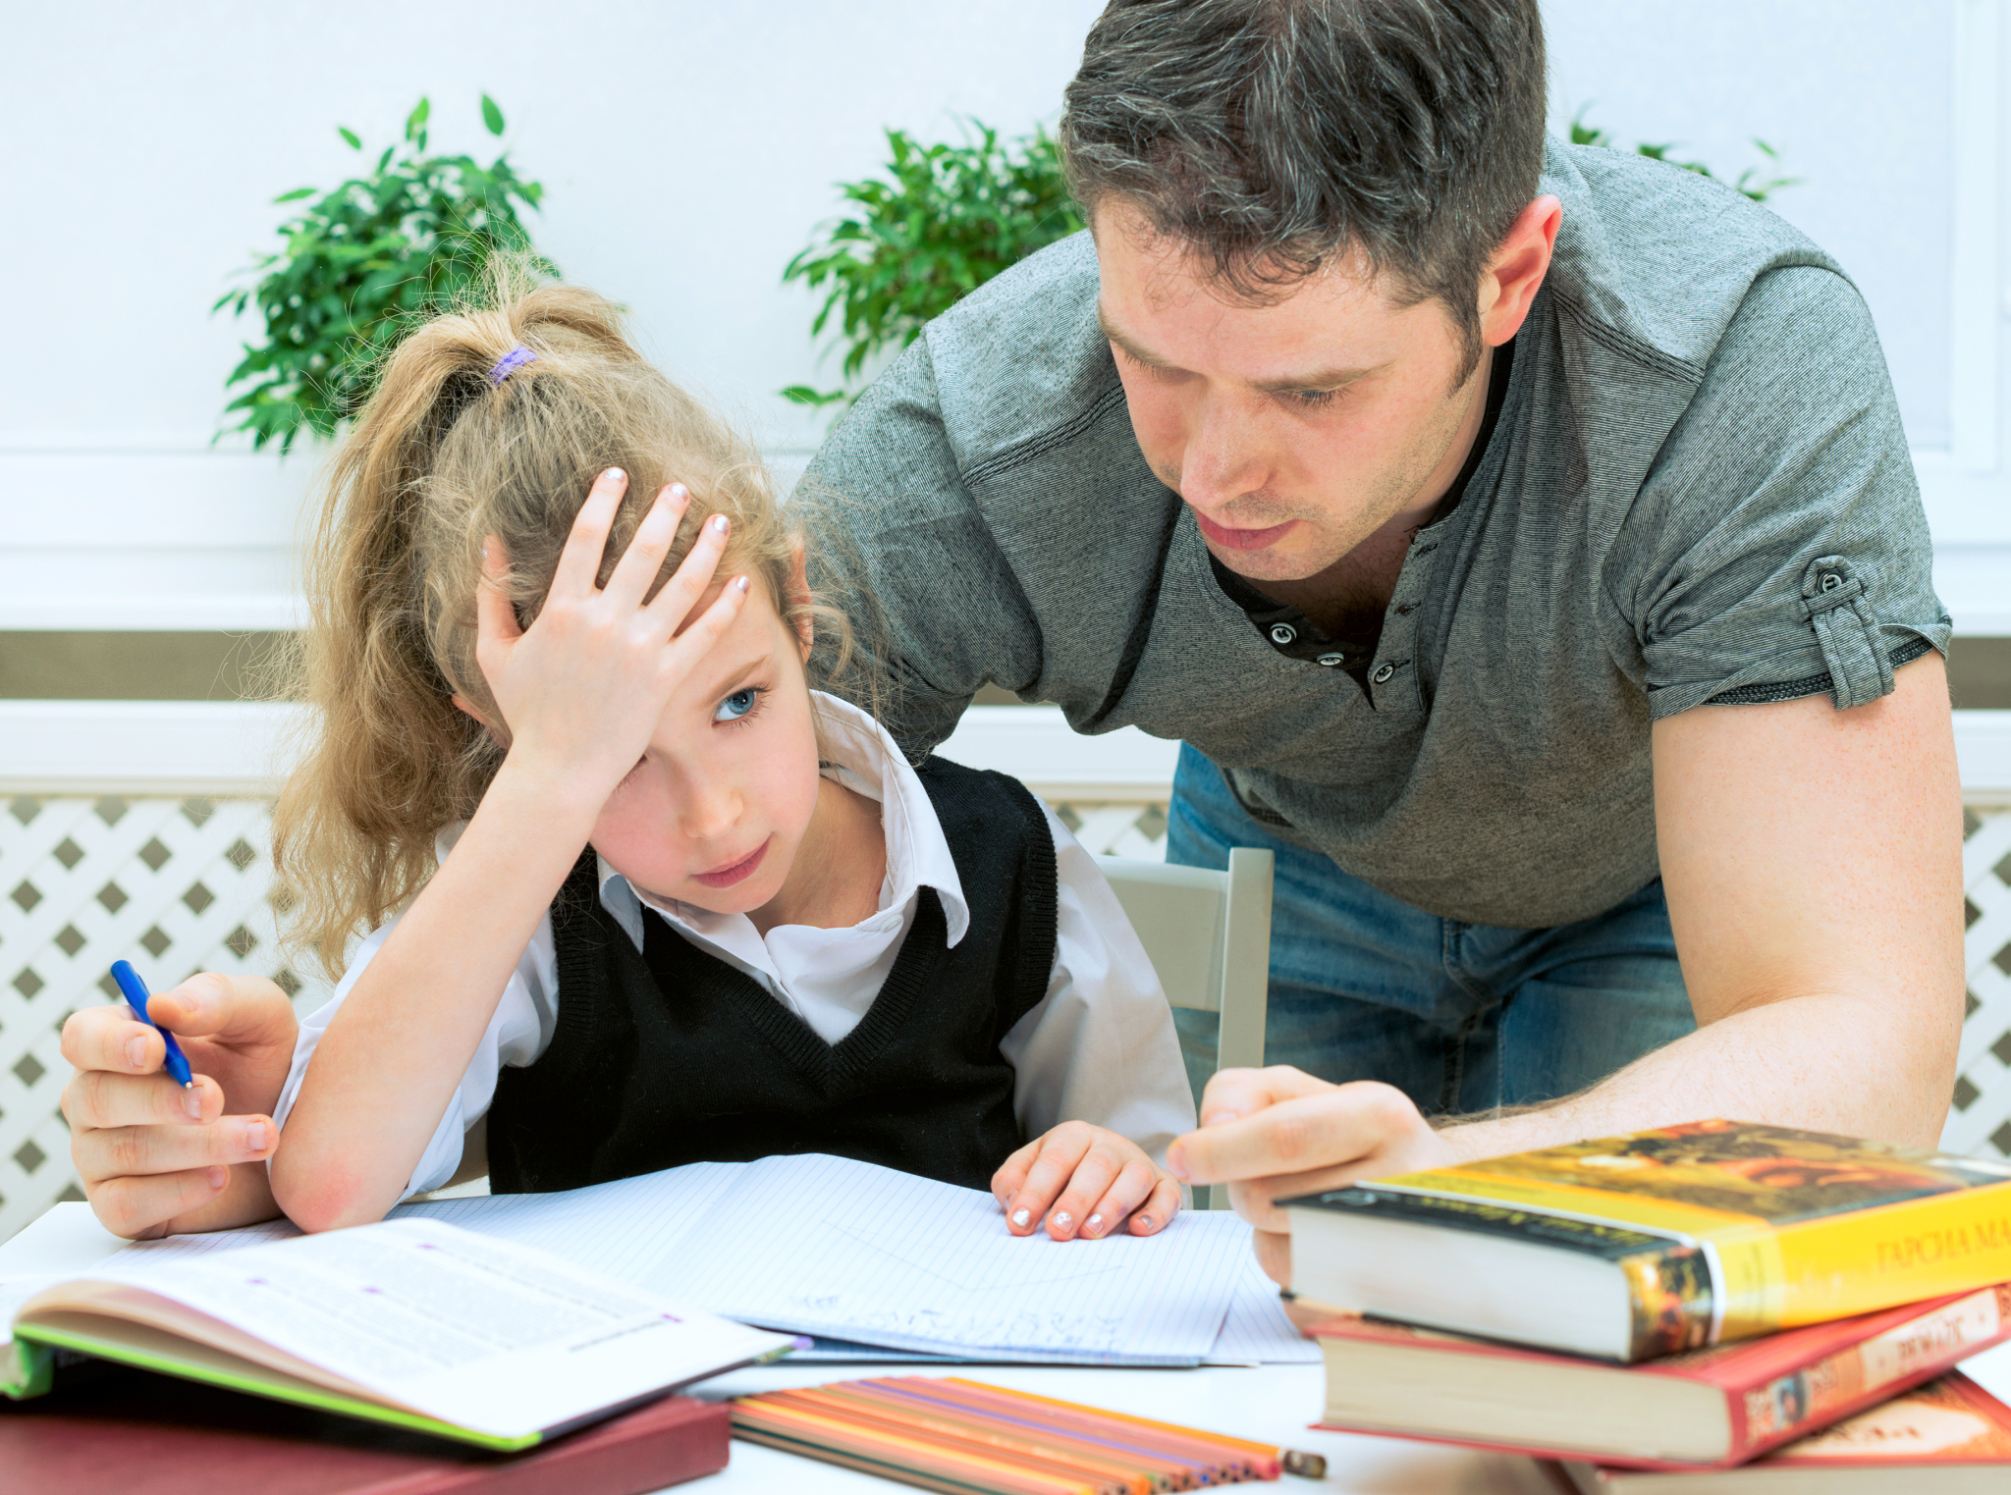 Is Homework Harmful or Helpful? Find the Answers You Need